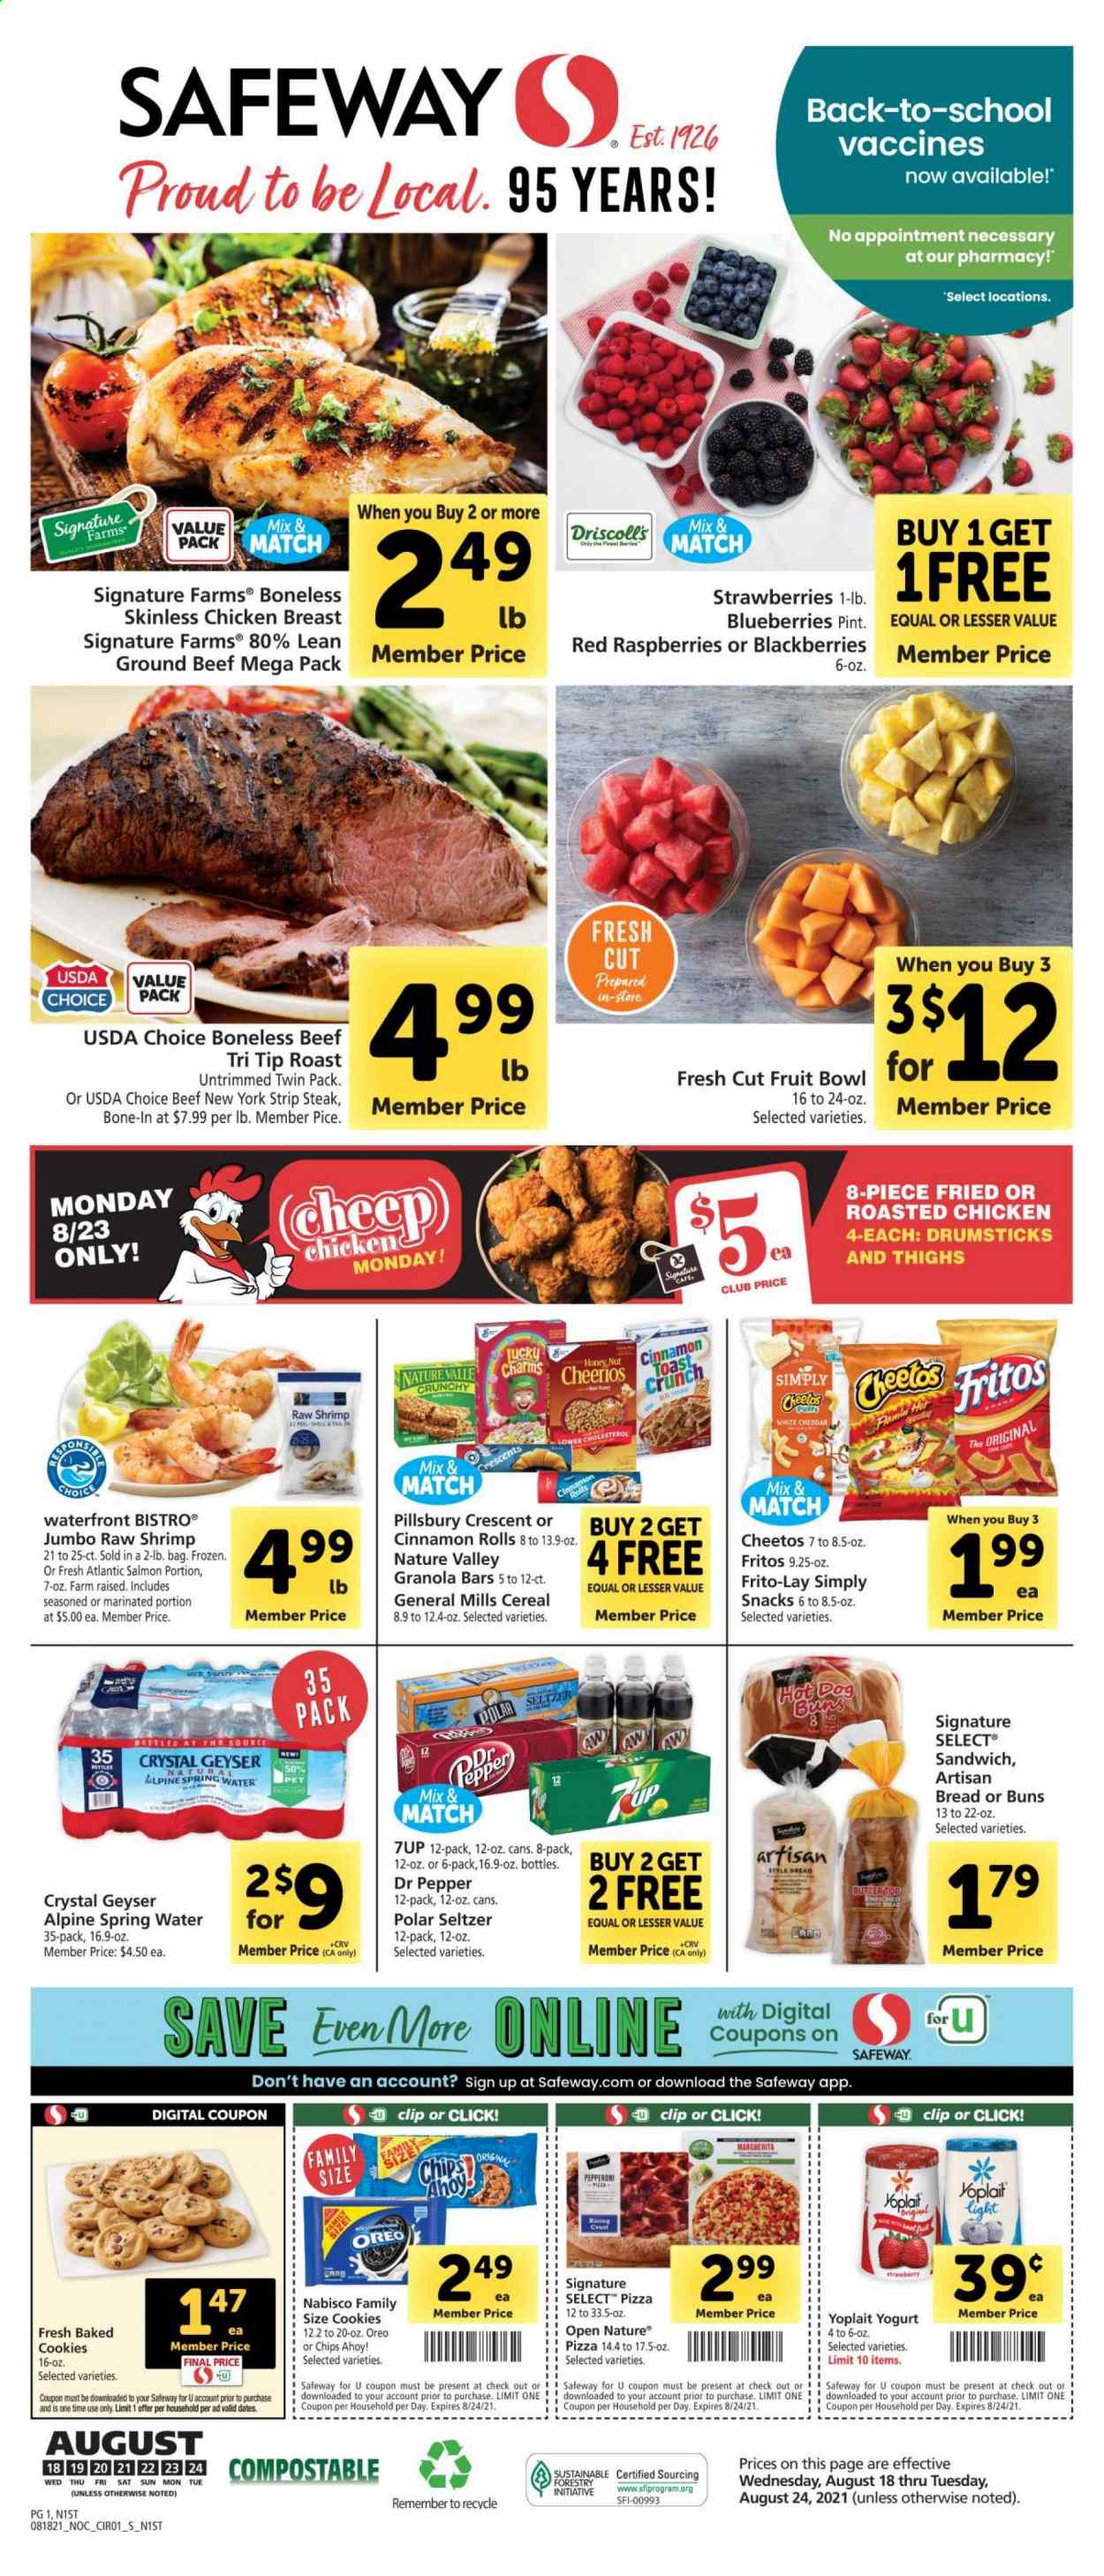 thumbnail - Safeway Flyer - 08/18/2021 - 08/24/2021 - Sales products - bread, buns, cinnamon roll, blackberries, blueberries, chicken breasts, beef meat, ground beef, steak, striploin steak, salmon, shrimps, pizza, chicken roast, sandwich, Pillsbury, pepperoni, yoghurt, Yoplait, cookies, snack, Chips Ahoy!, Fritos, Cheetos, Frito-Lay, cereals, Cheerios, granola bar, Nature Valley, Dr. Pepper, 7UP, seltzer water, spring water, bowl. Page 1.